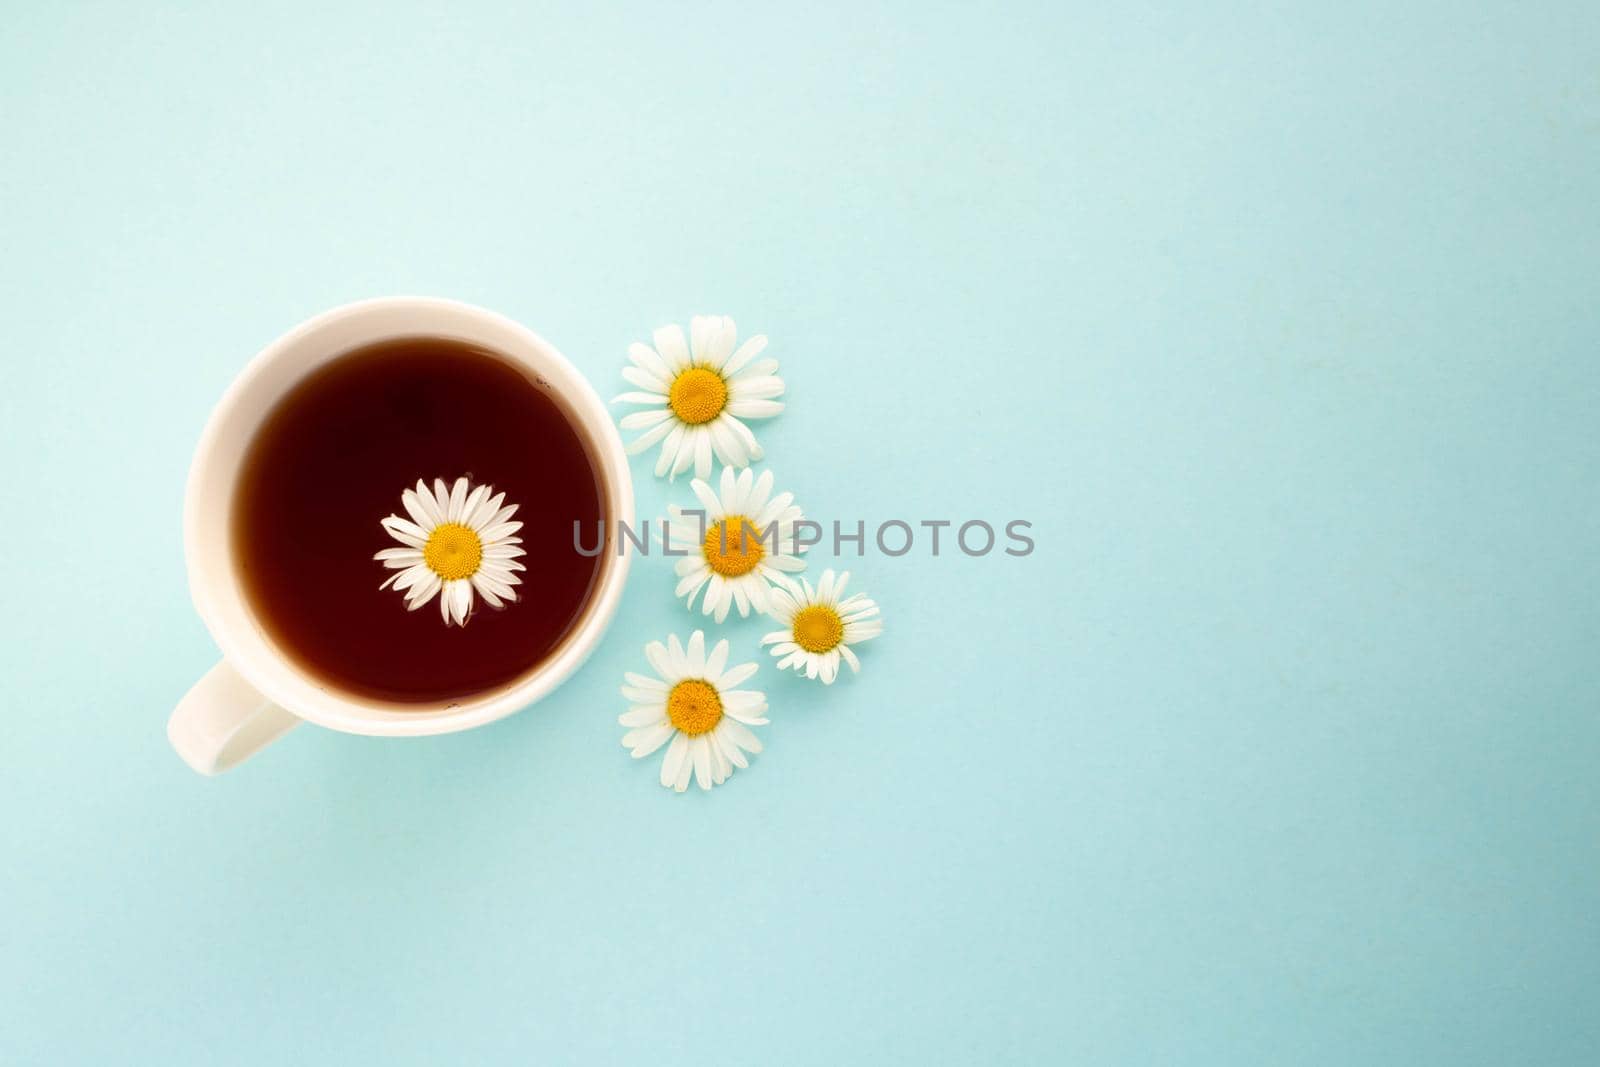 Chamomile tea. On a blue background, a white cup with tea and daisies.